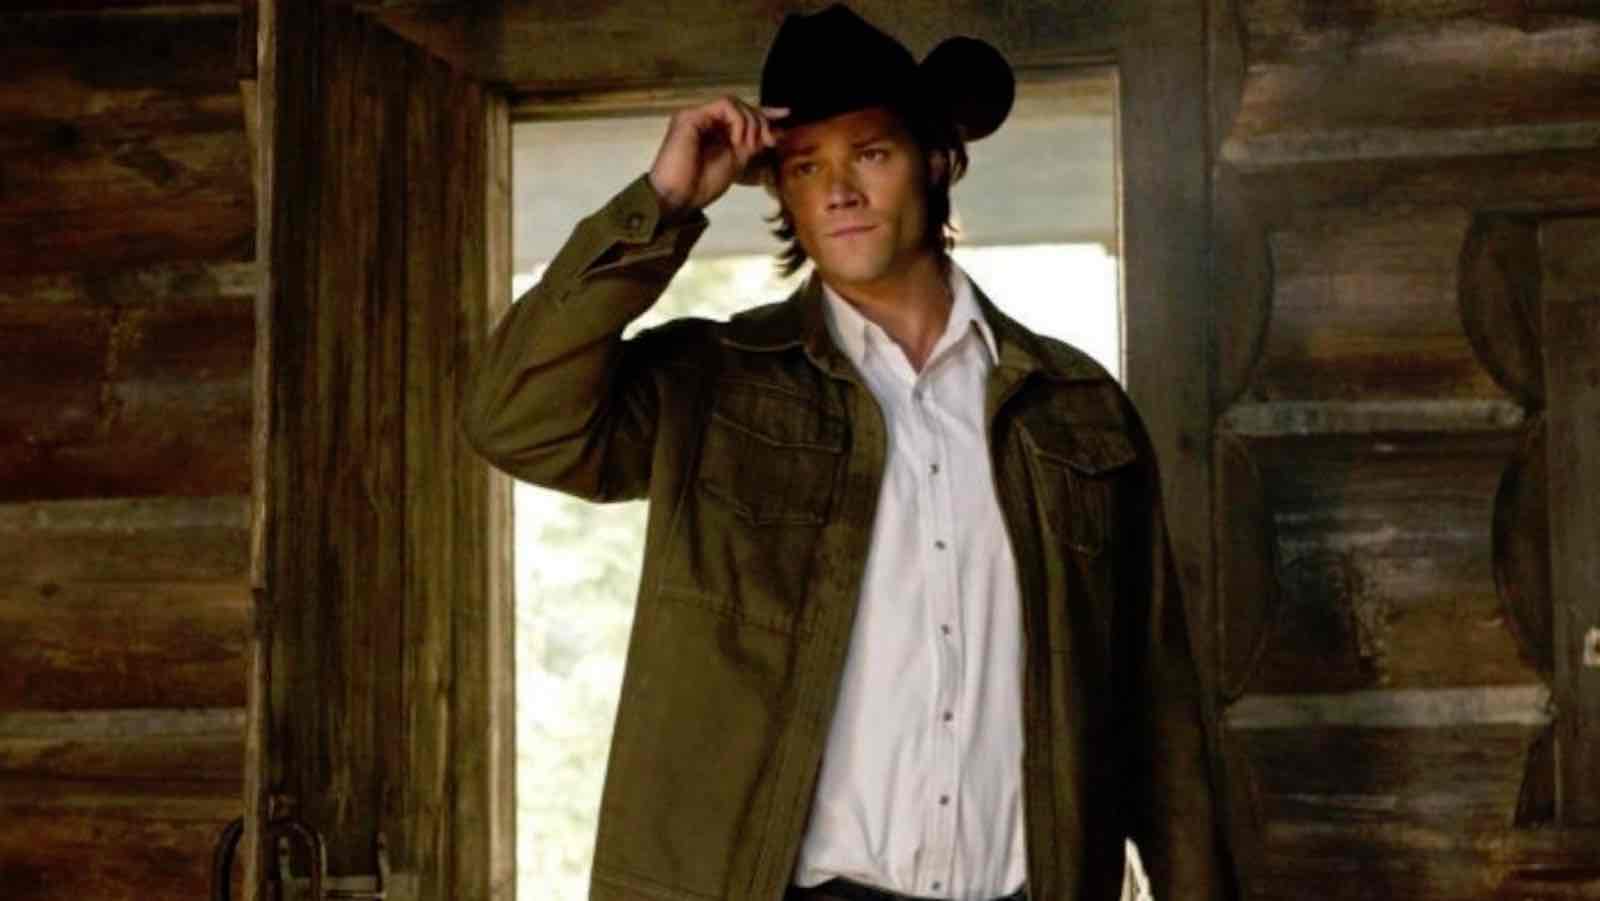 ‘Walker’ receives a new look with Jared Padalecki as the Texas Ranger